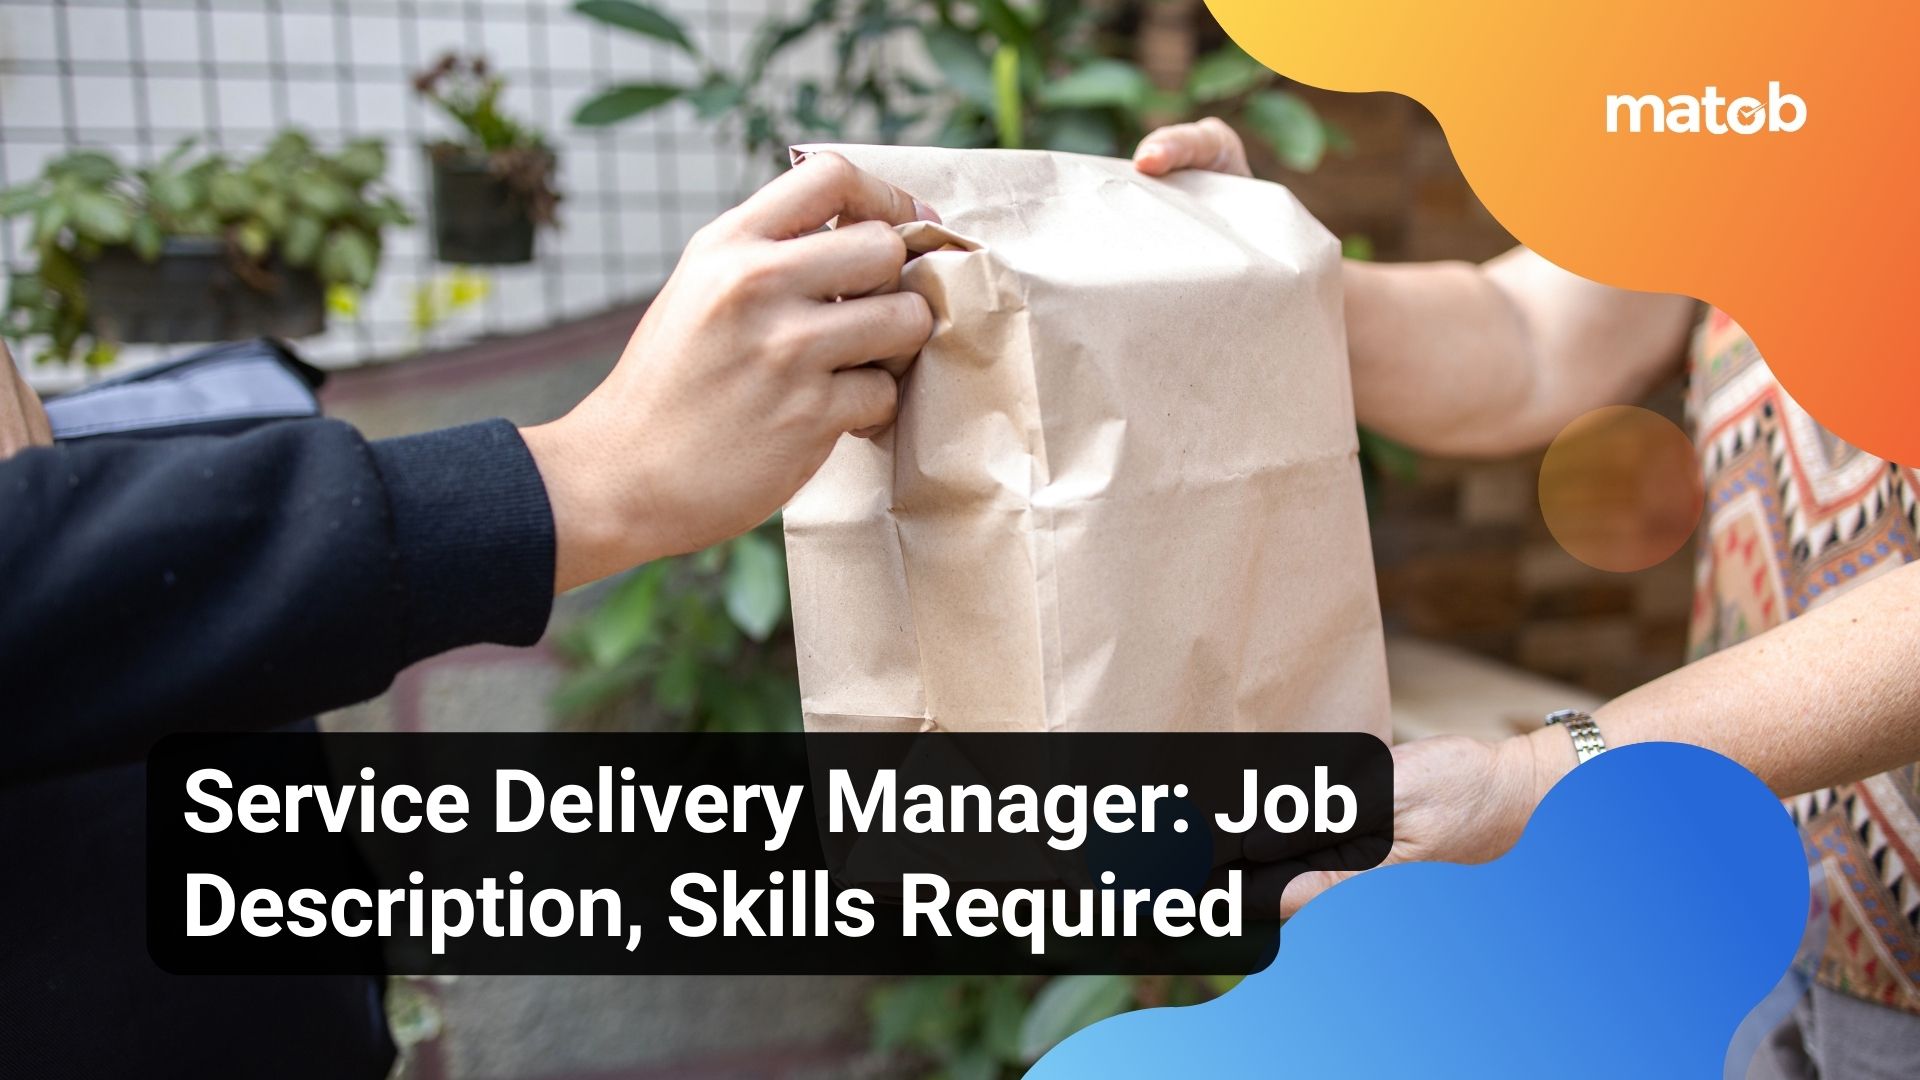 Service Delivery Manager: Job Description, Skills Required